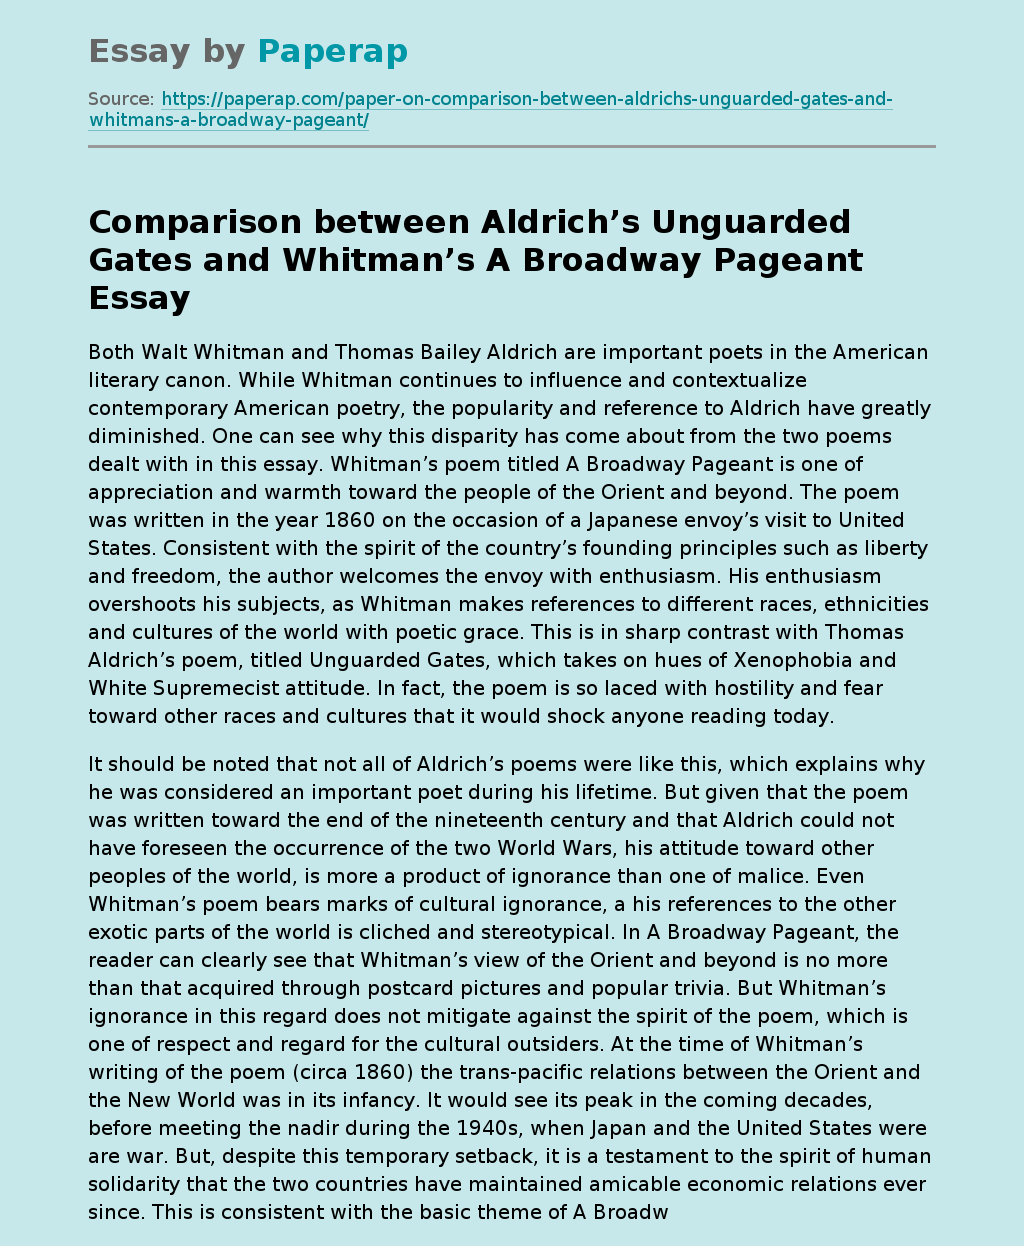 Comparison between Aldrich&#8217;s Unguarded Gates and Whitman&#8217;s A Broadway Pageant